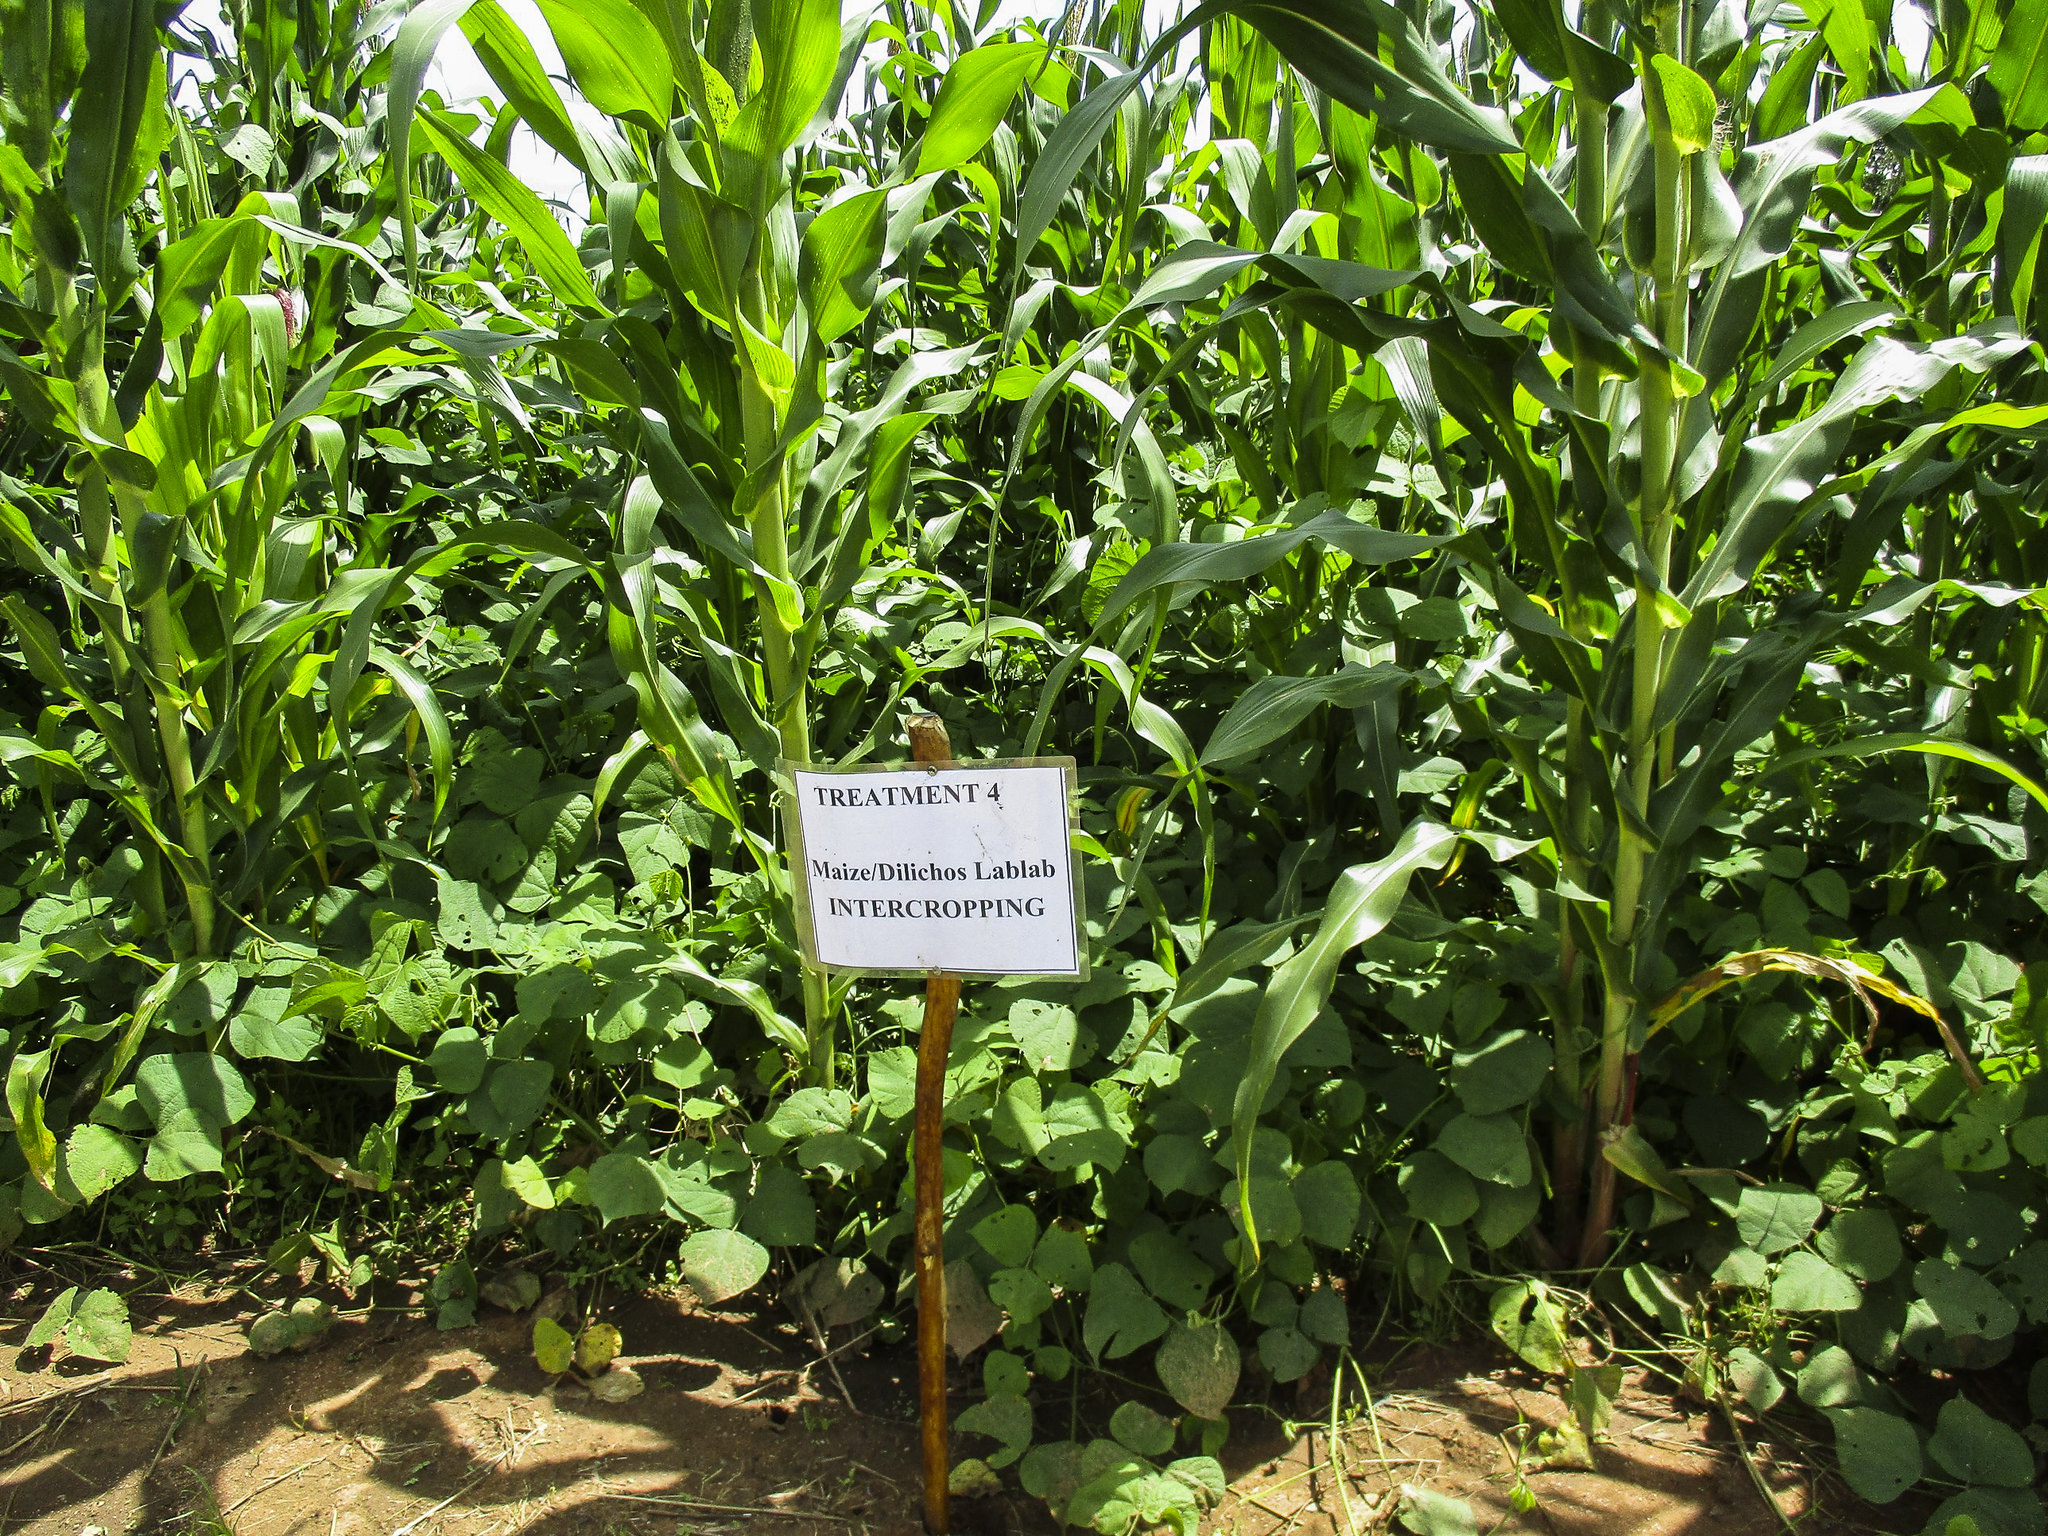 Intercropping options for mitigating fall armyworm damage. (Photo: C. Thierfelder/CIMMYT)